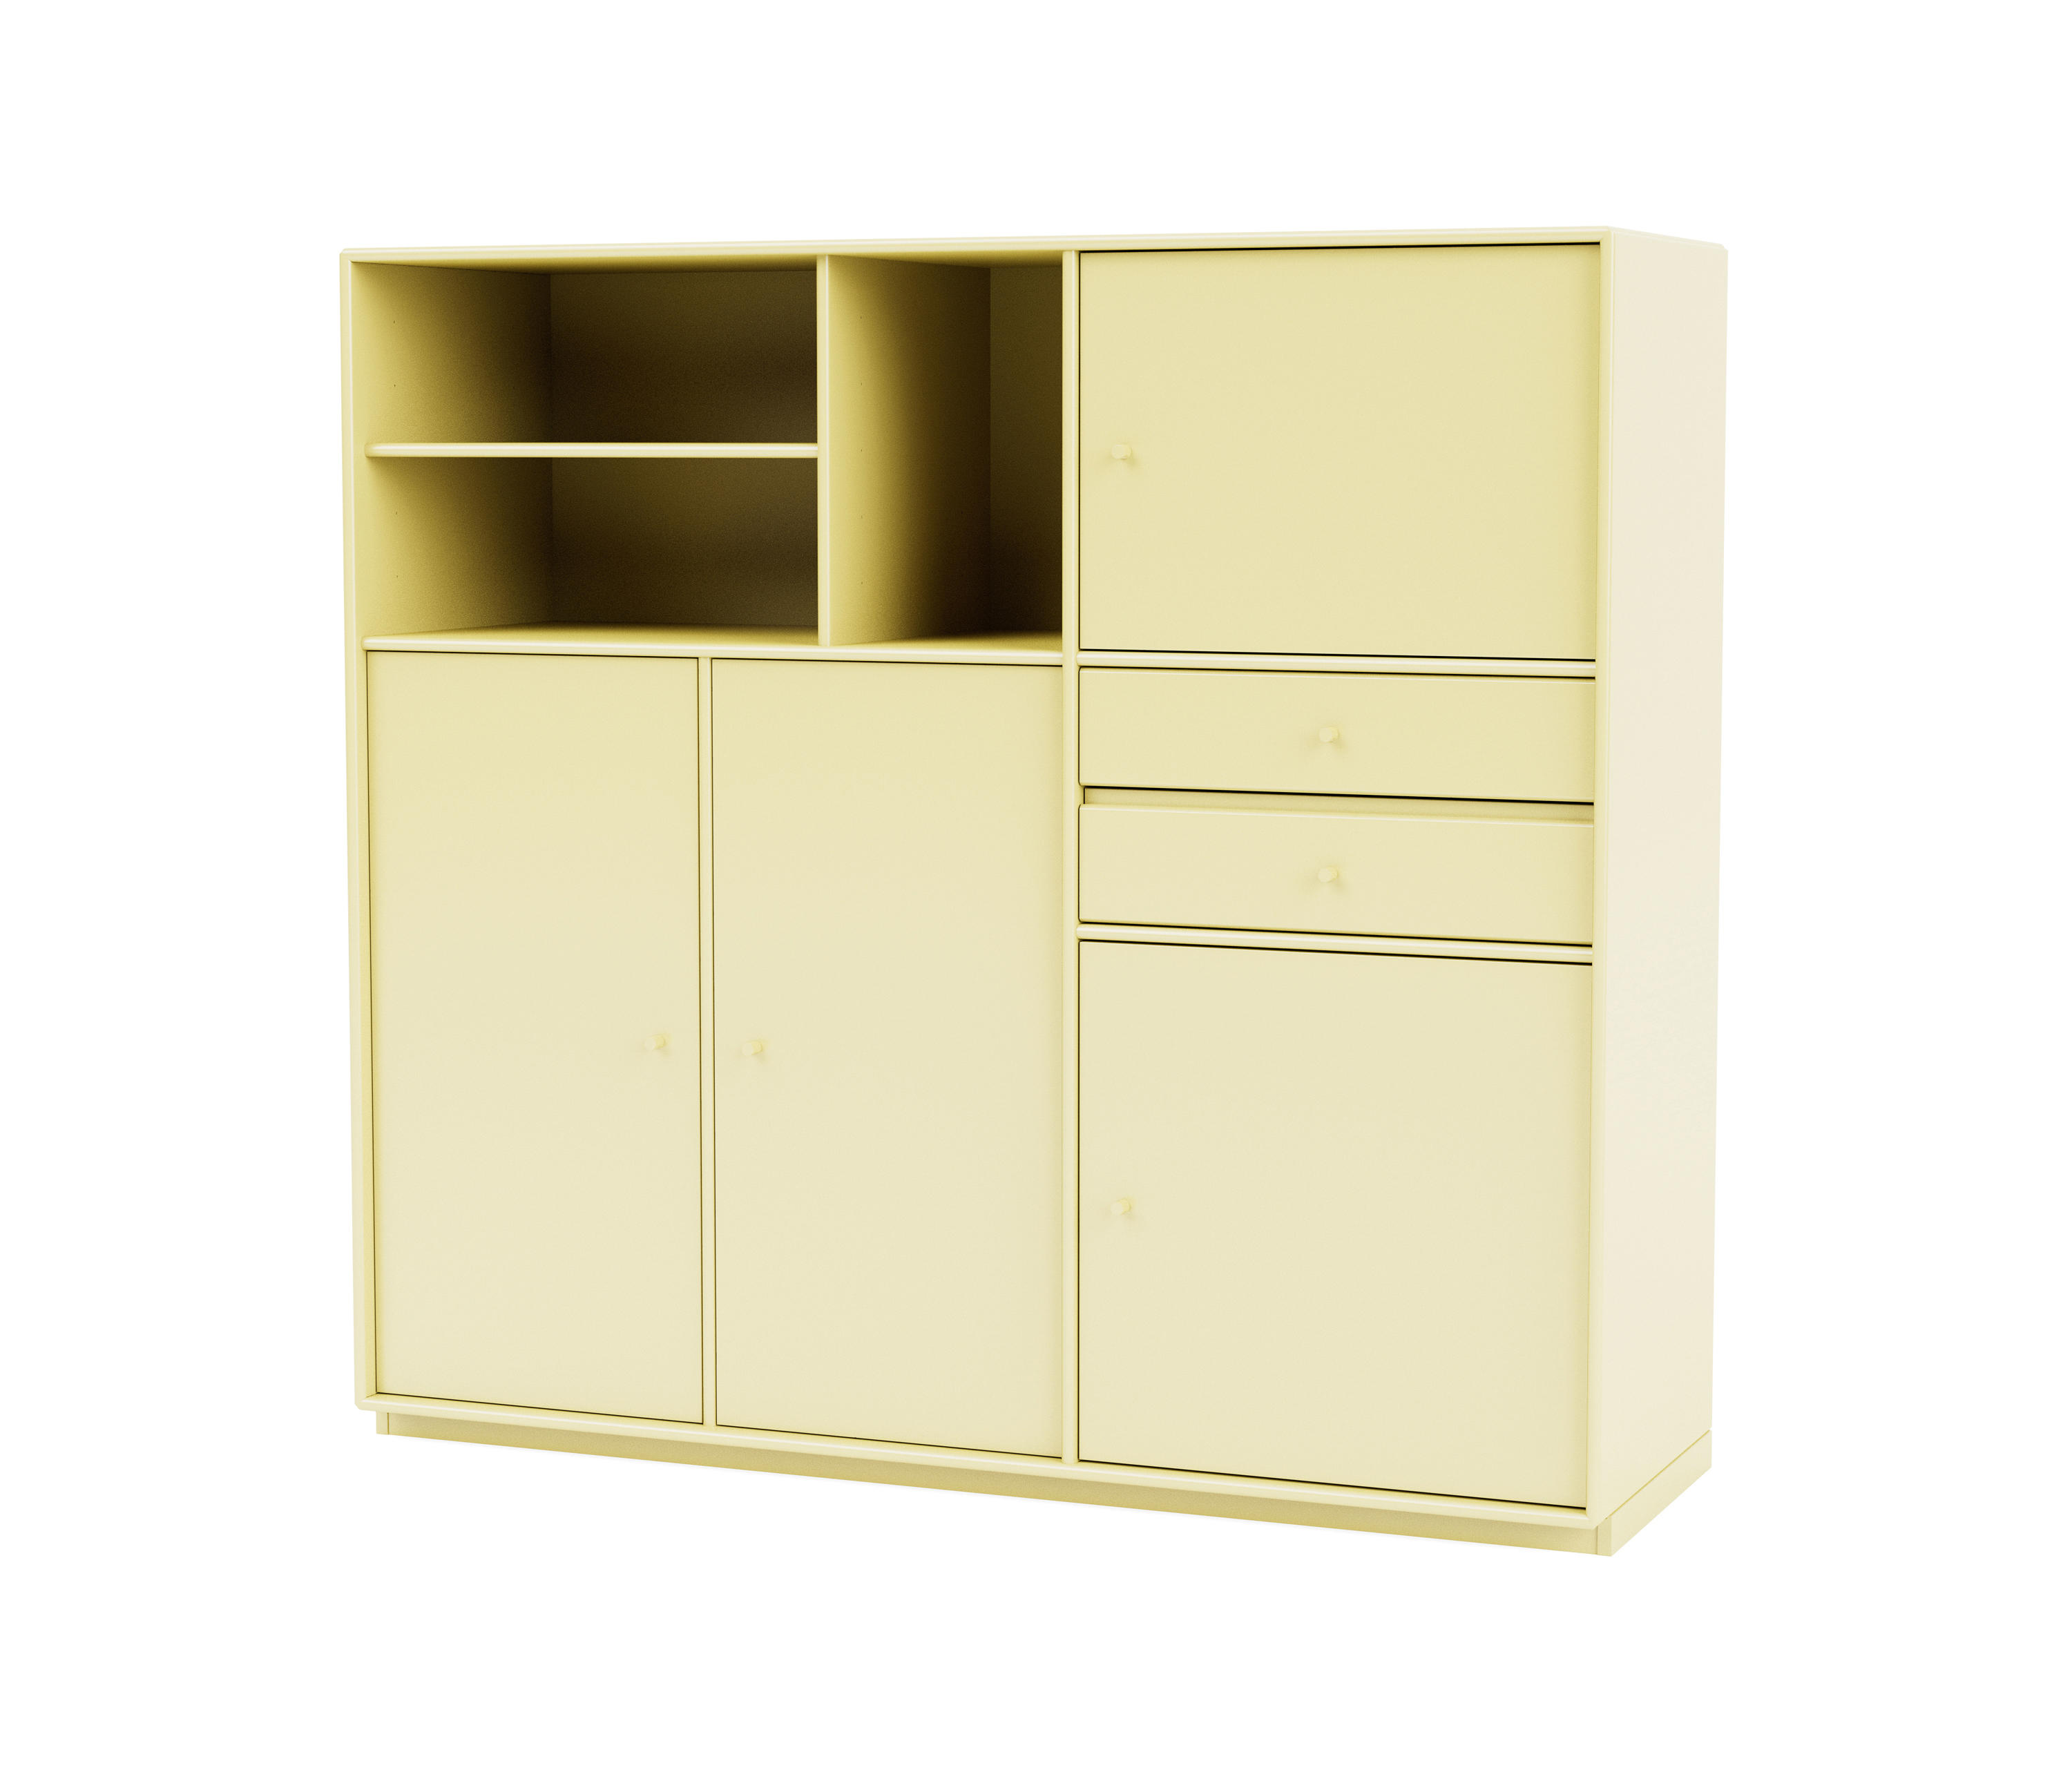 Rondsel Moreel Promotie Montana Mega | 201803 highboard with doors and shelves | Architonic